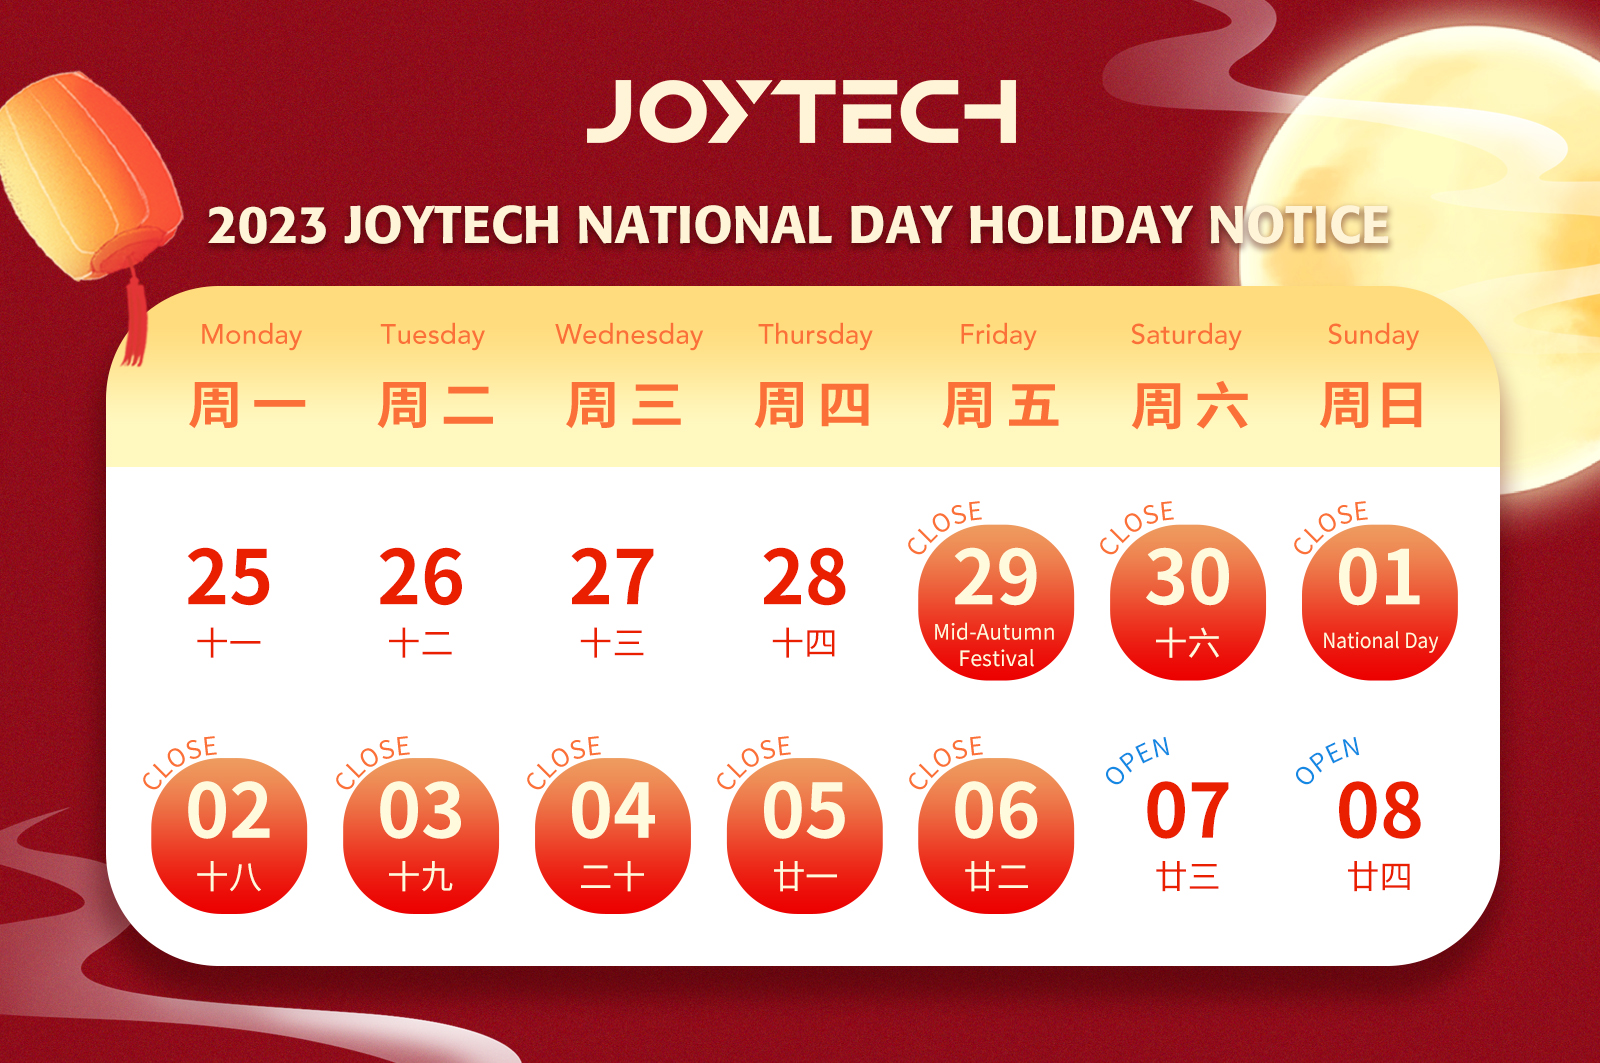 Important Notice: Holiday Schedule for Mid-Autumn Festival And National Day Festival